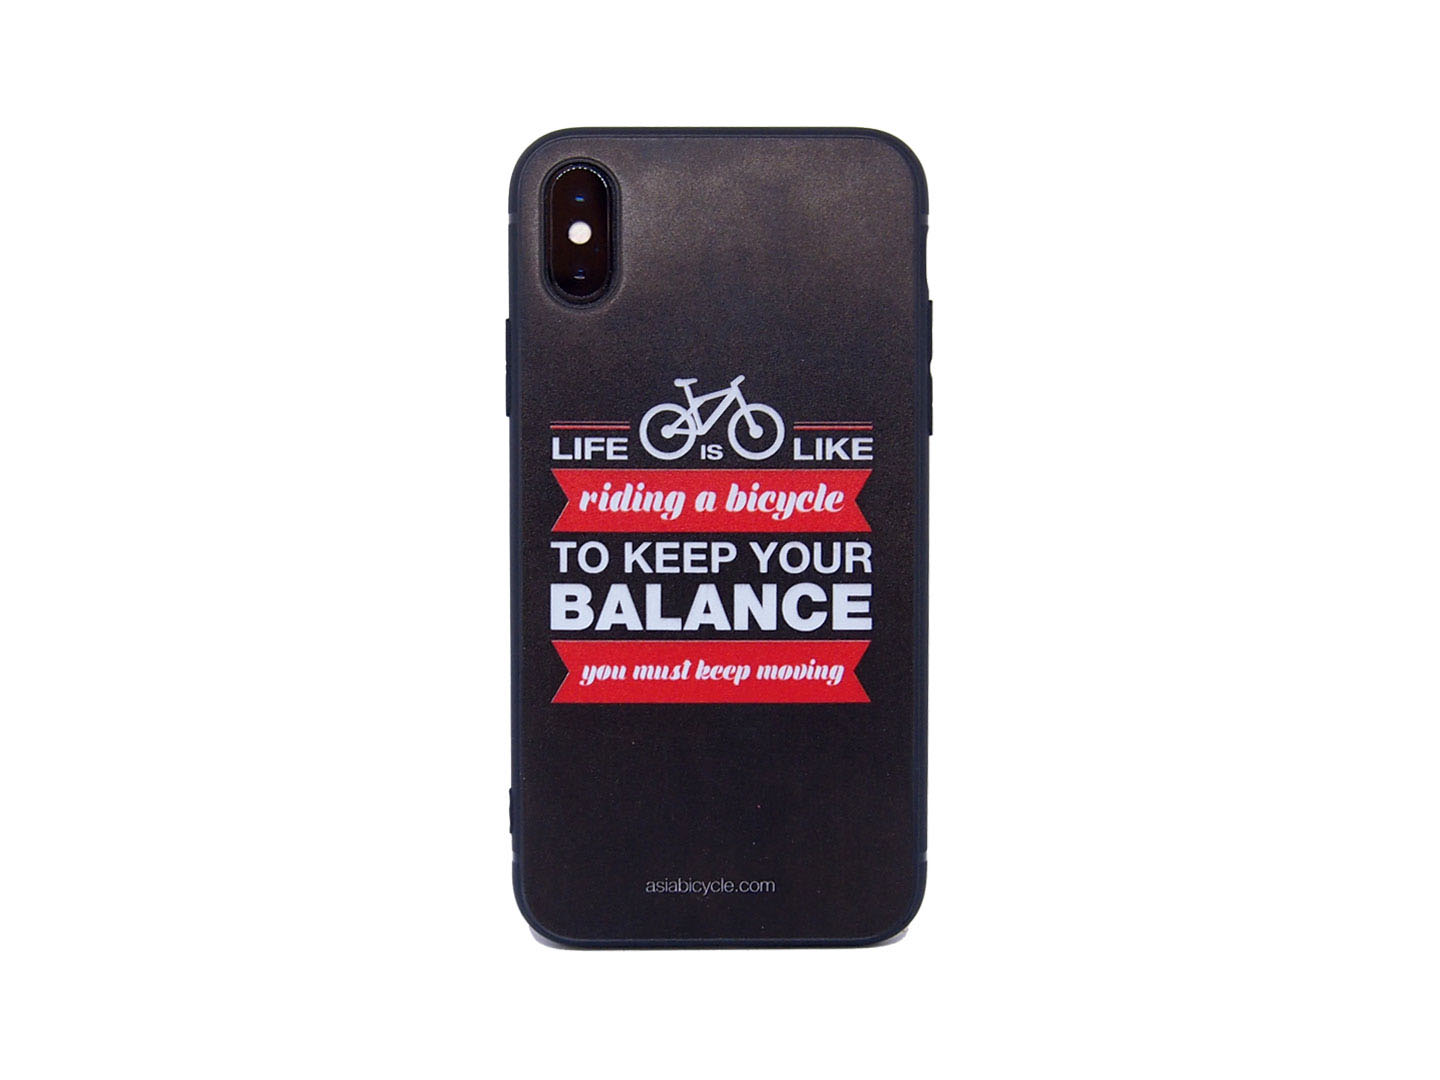 iPhone X SOFT CASE INSPIRATIONAL QUOTE - BALANCE